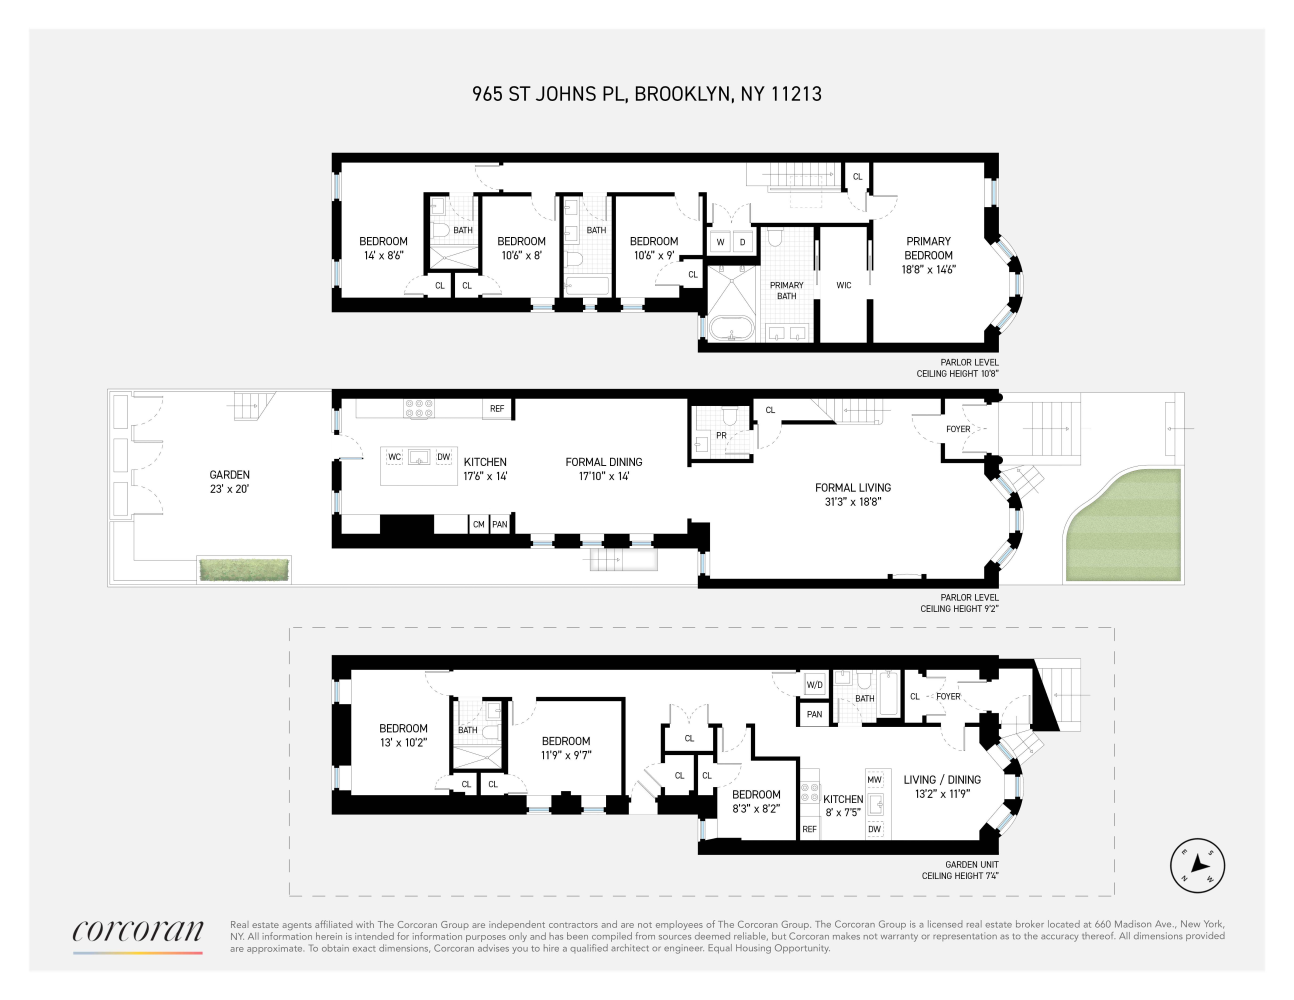 Floorplan for 965 St Johns Place